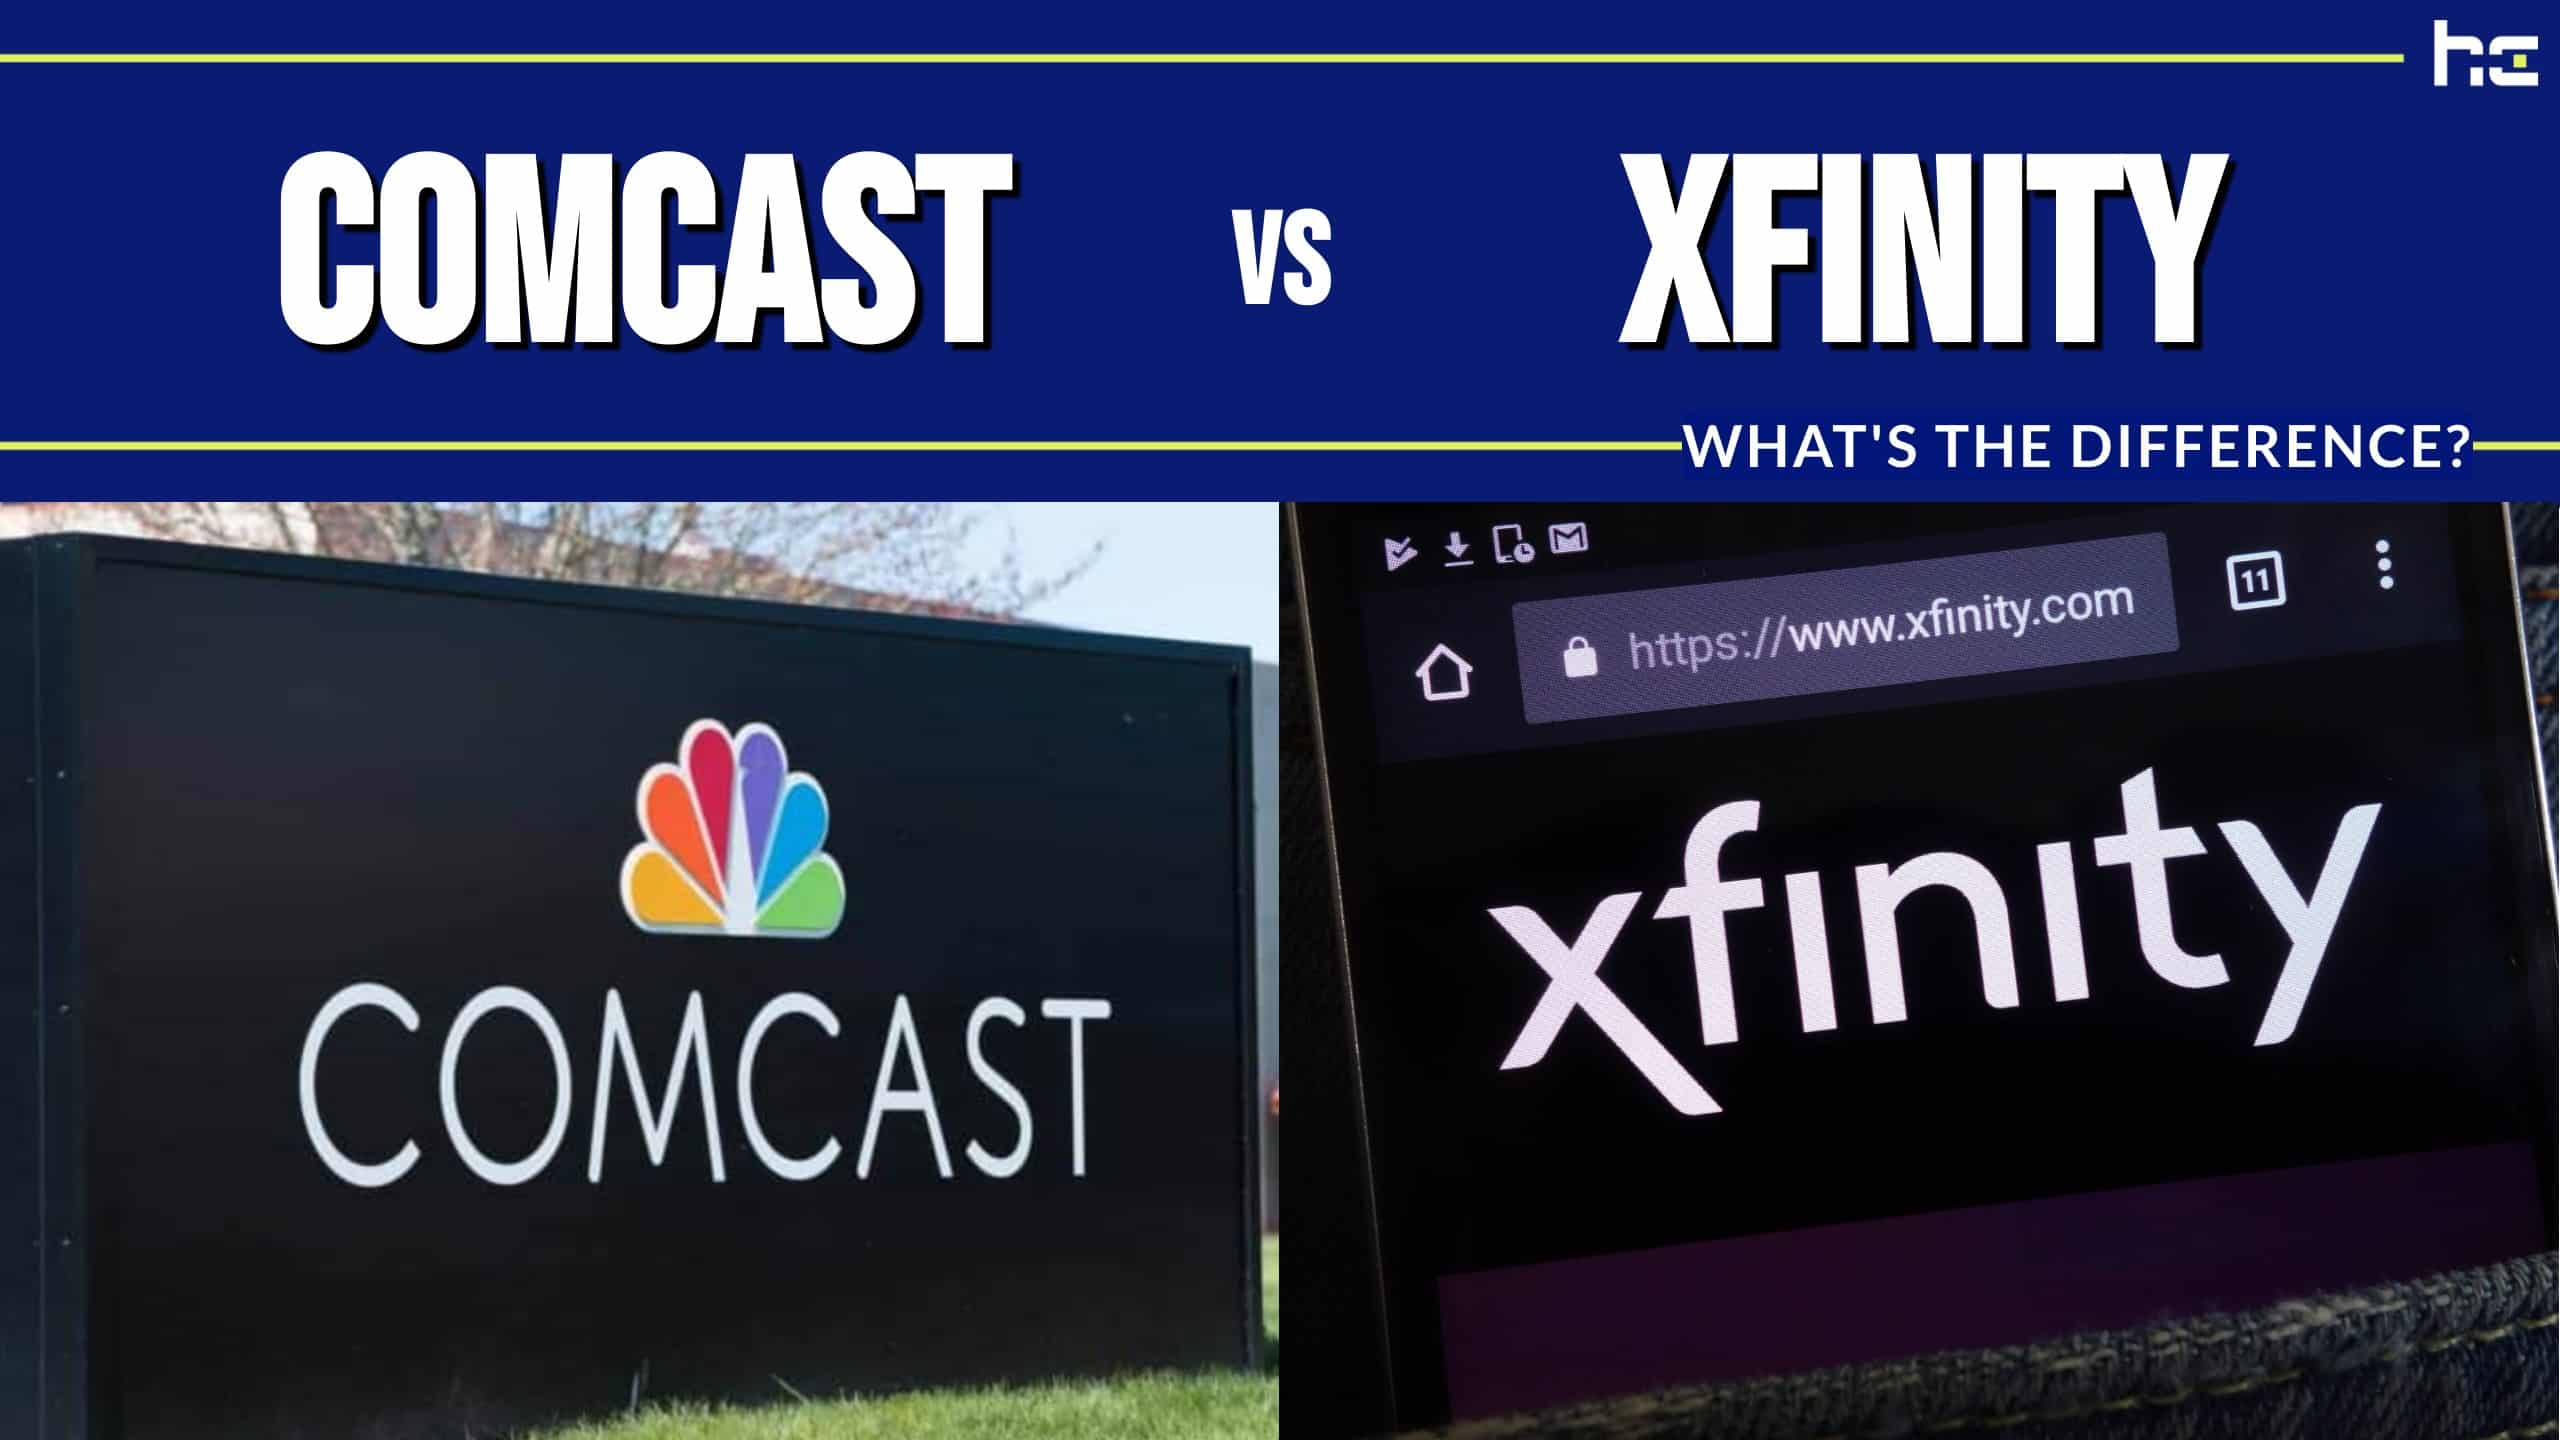 featured image for Comcast vs Xfinity